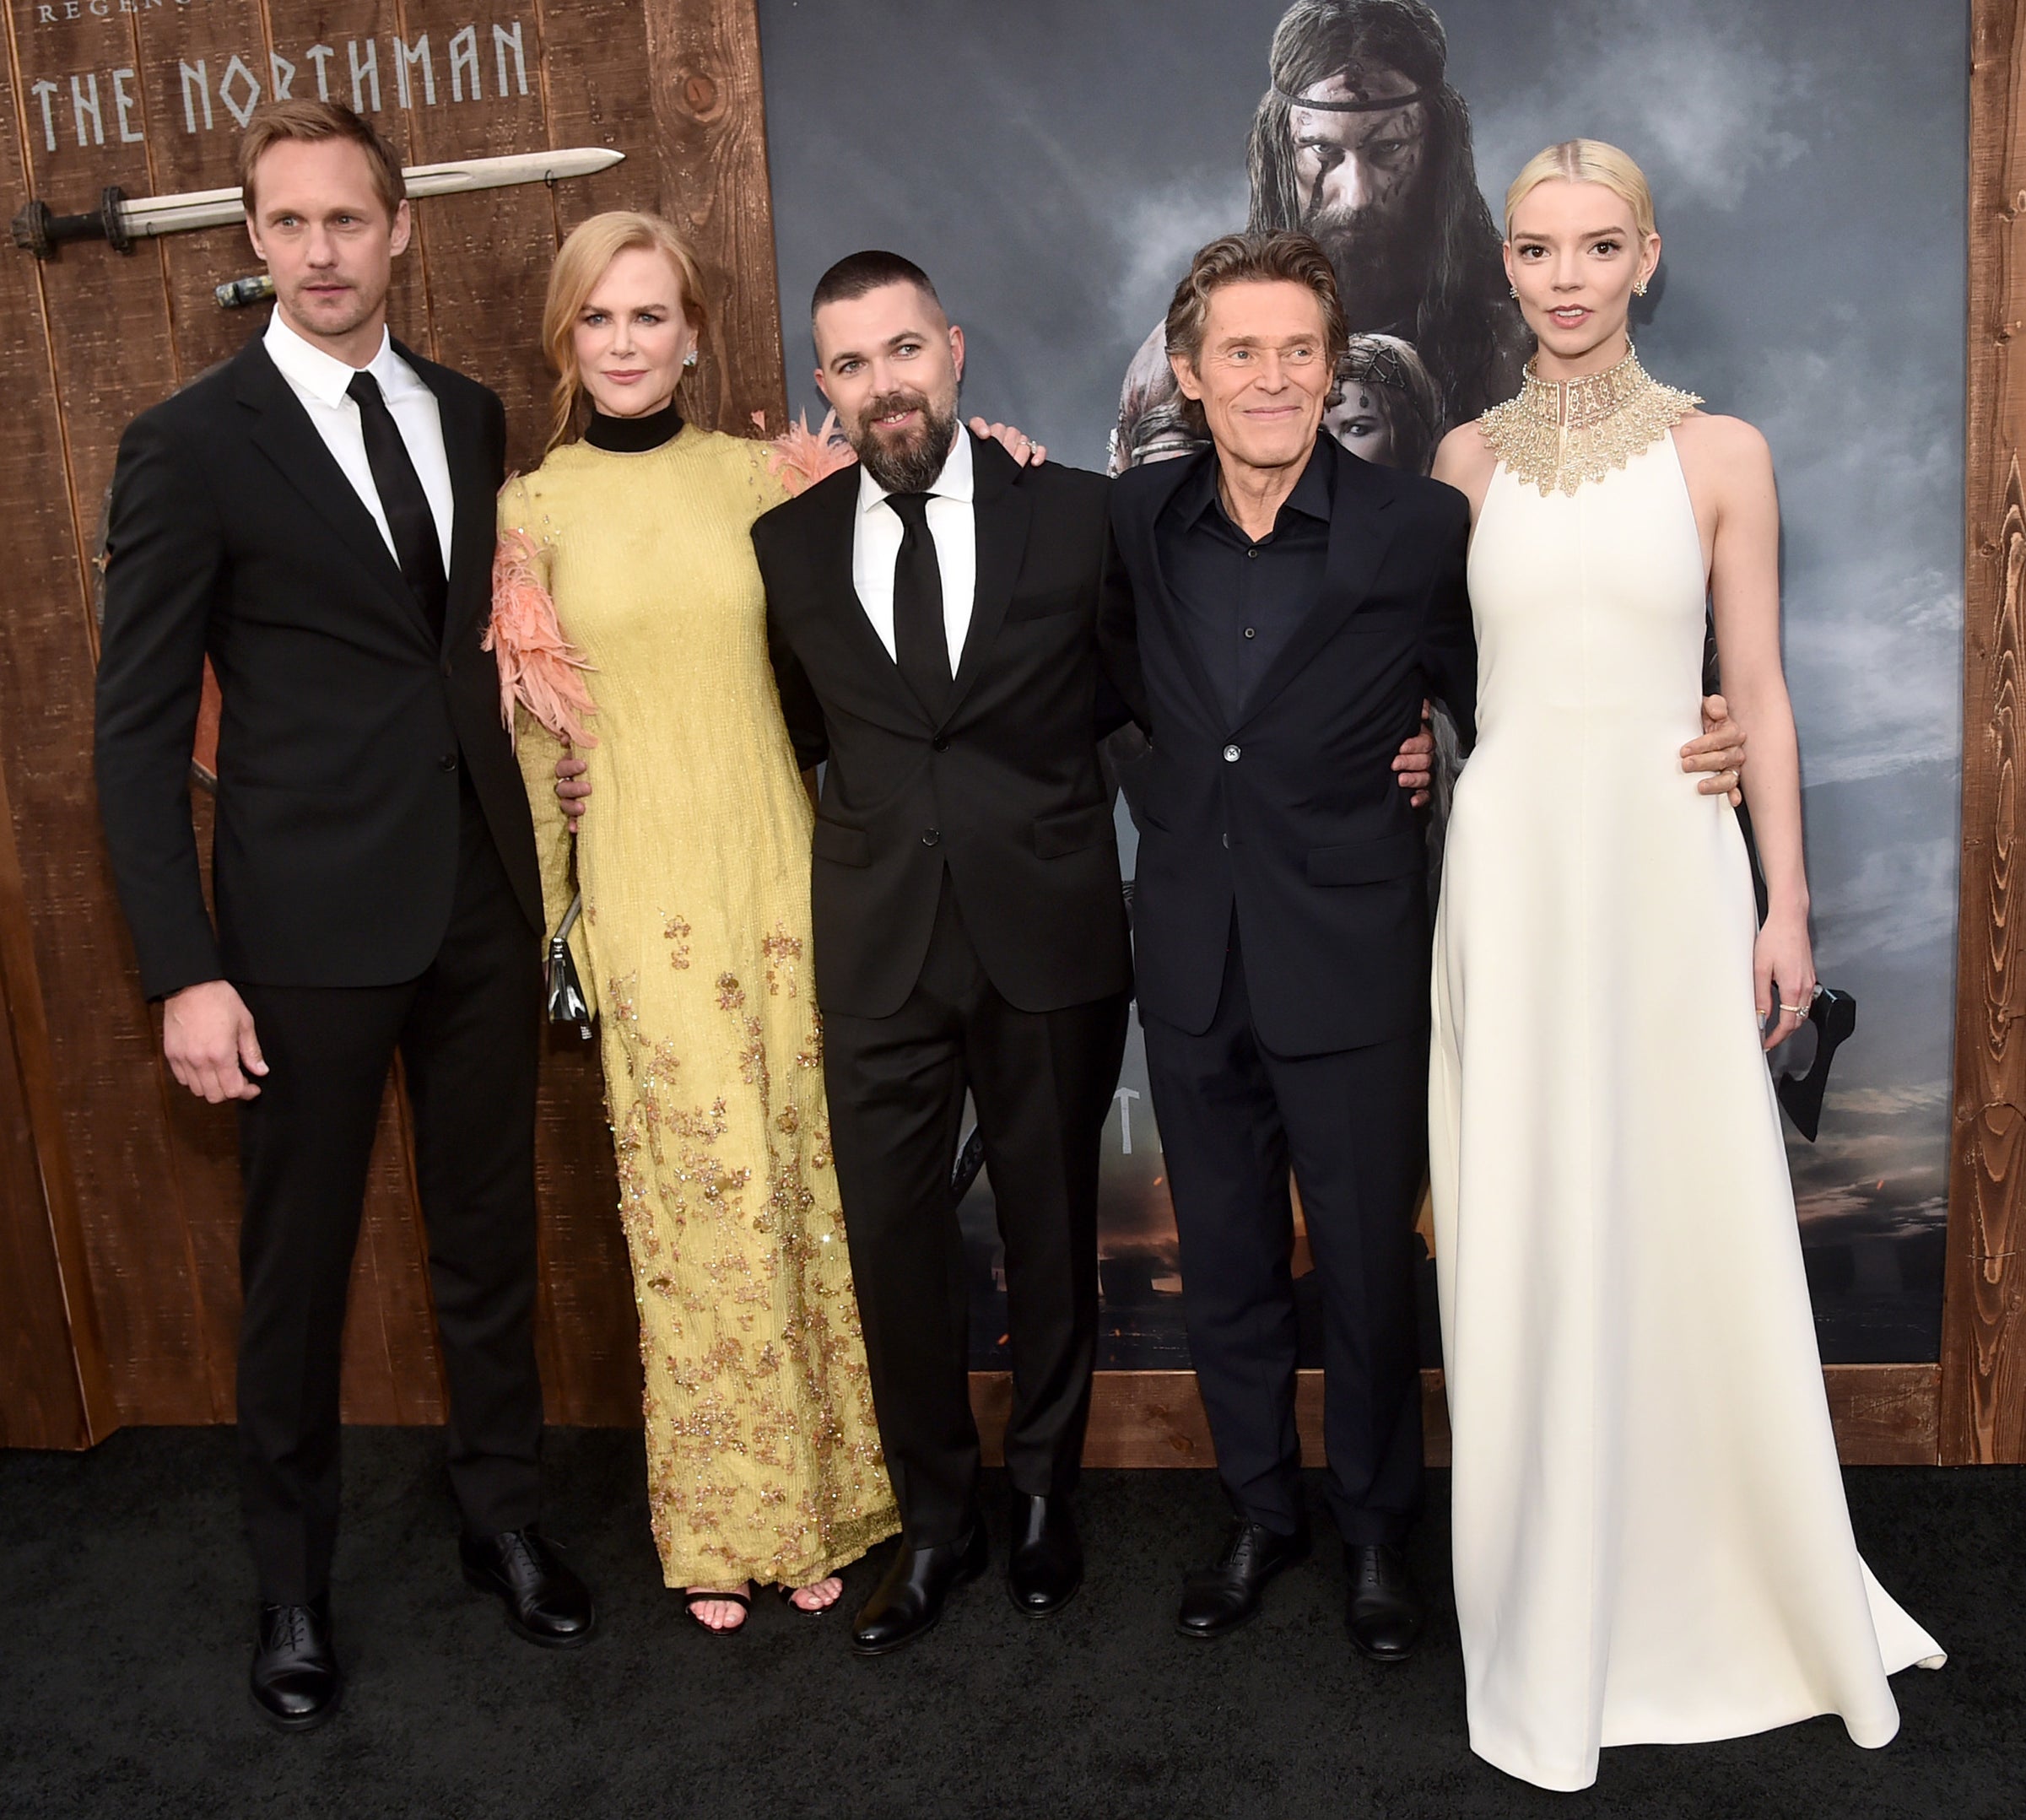 Cast of the Northman at the premiere